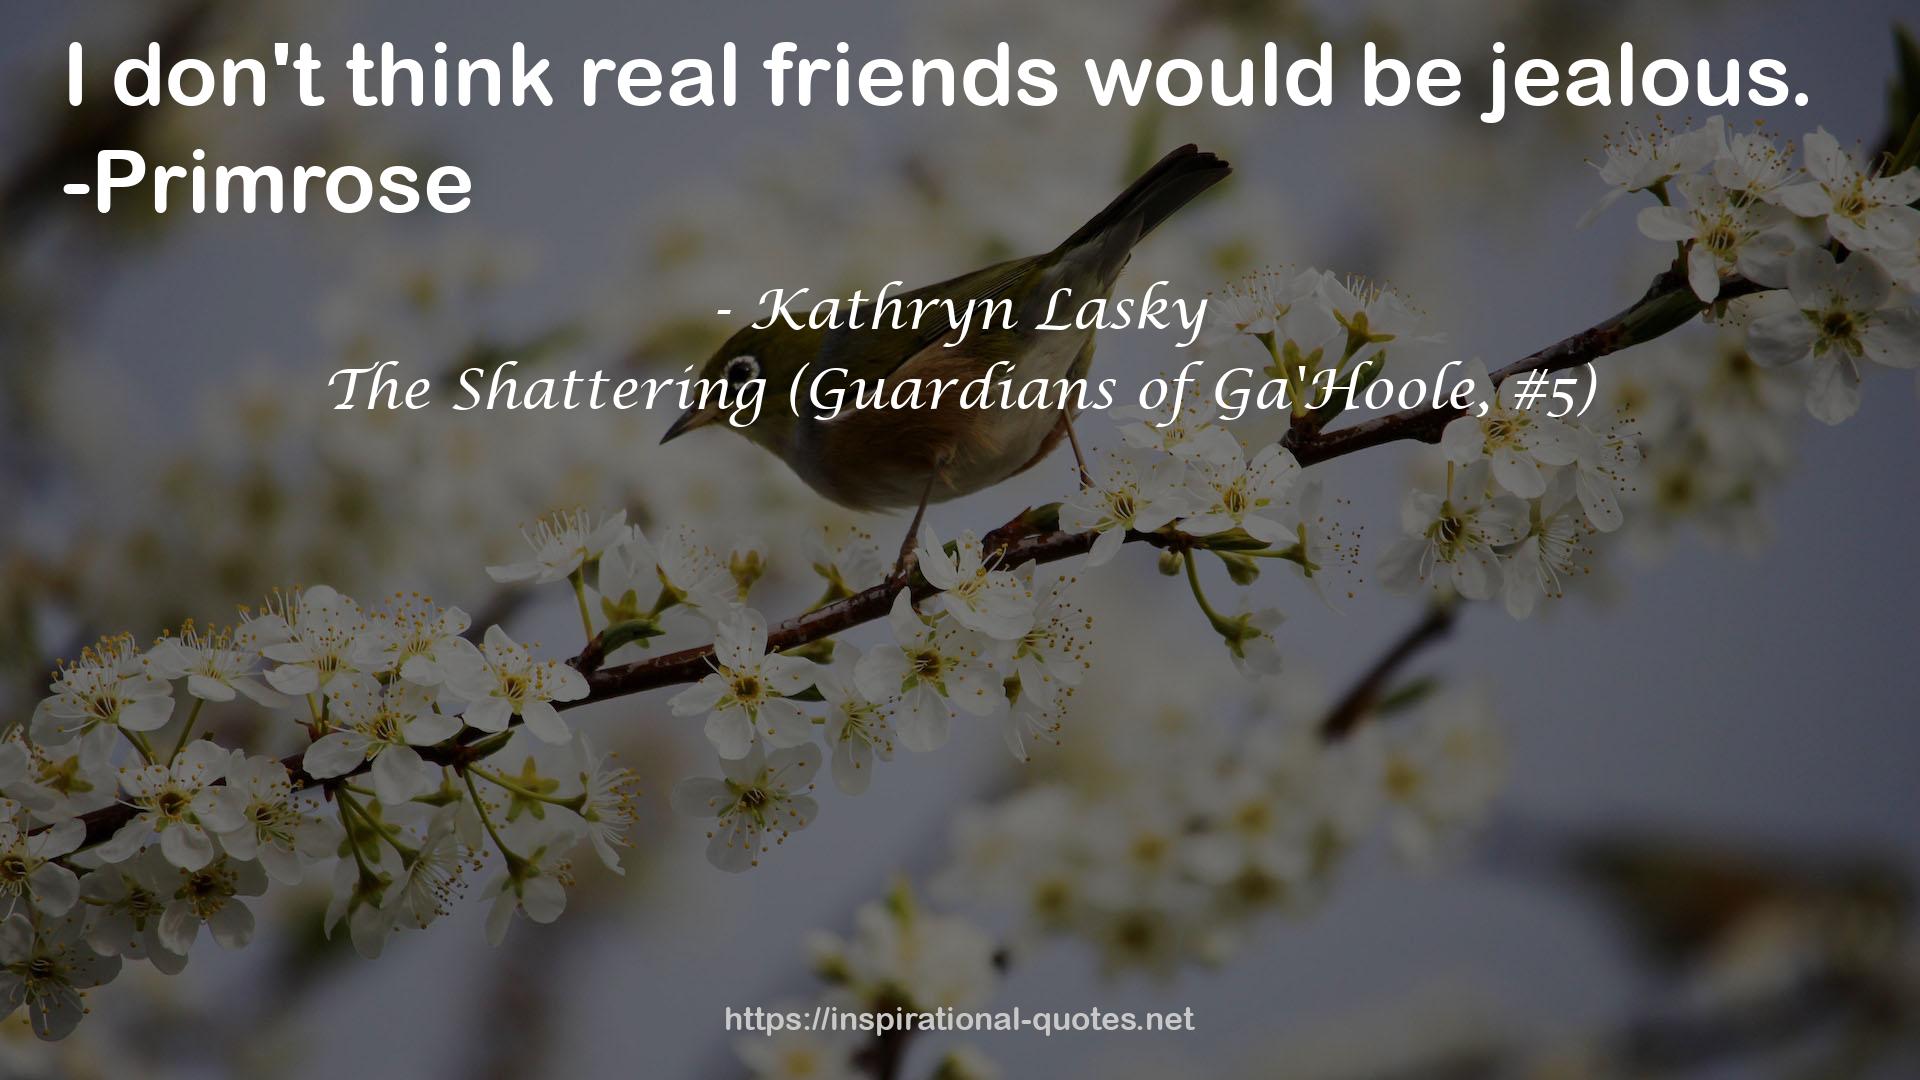 The Shattering (Guardians of Ga'Hoole, #5) QUOTES